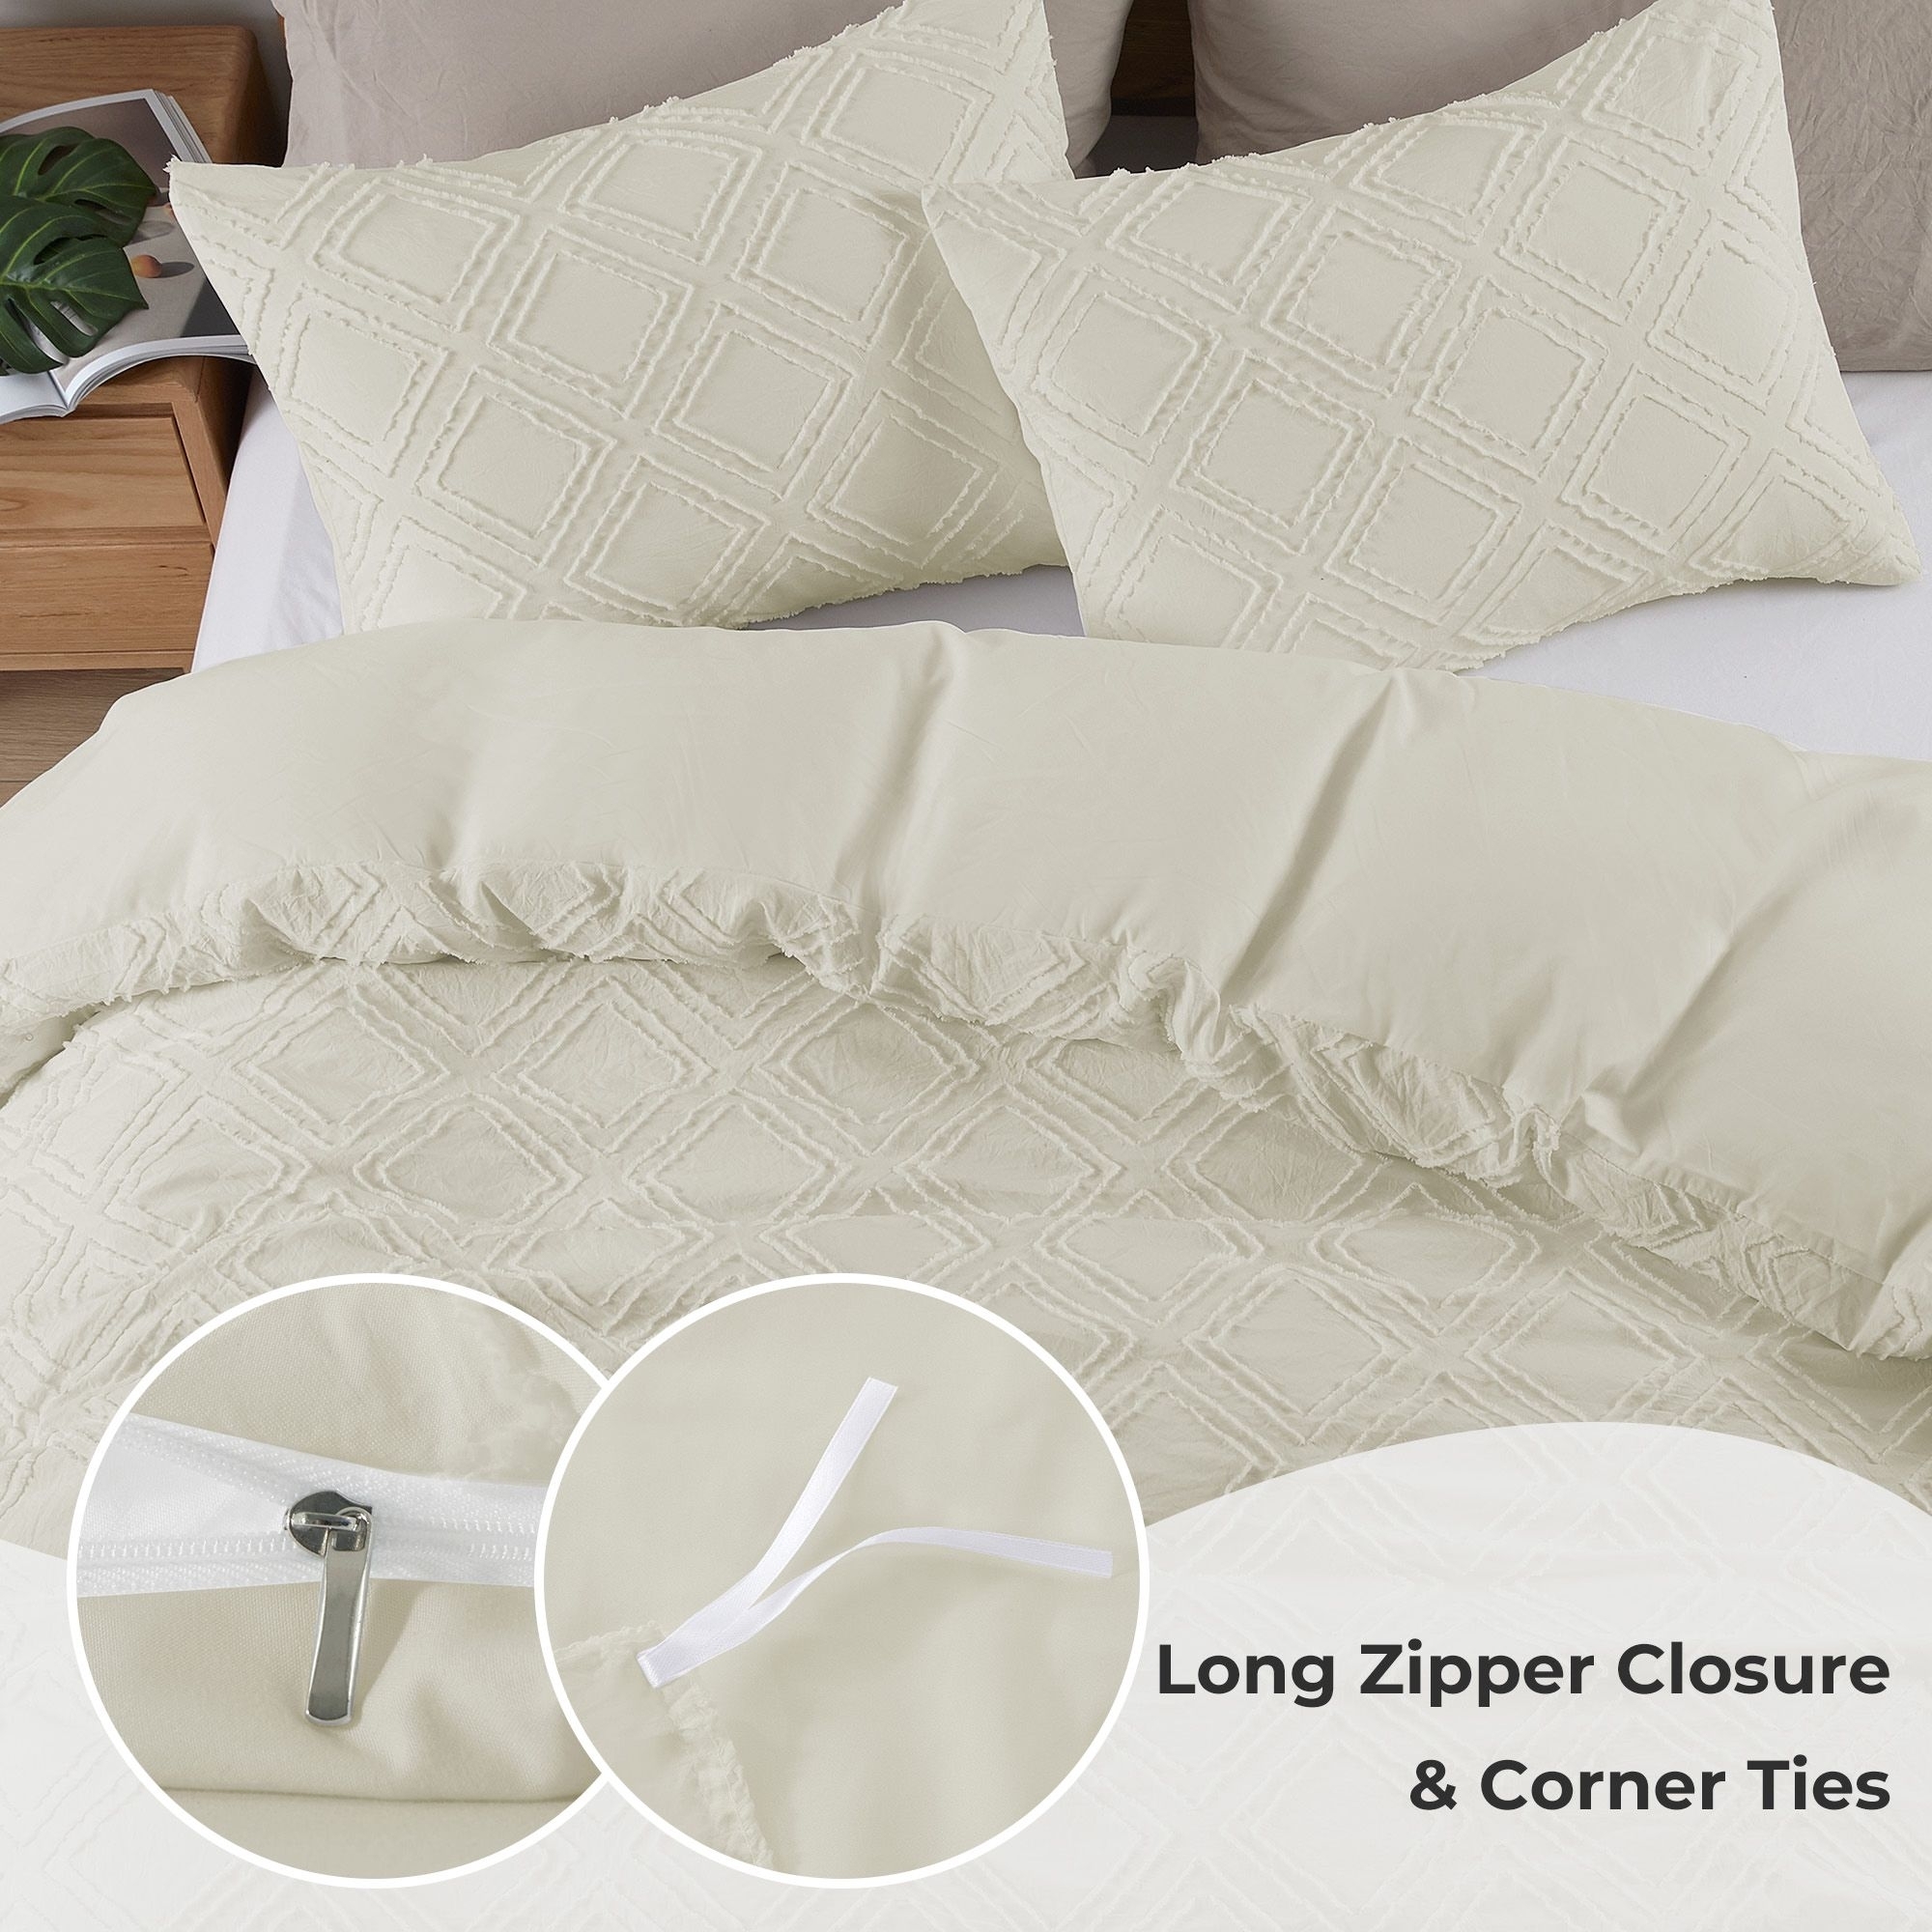 Clipped Jacquard Duvet Cover Set With Shams - Cream/Square, Full/Queen